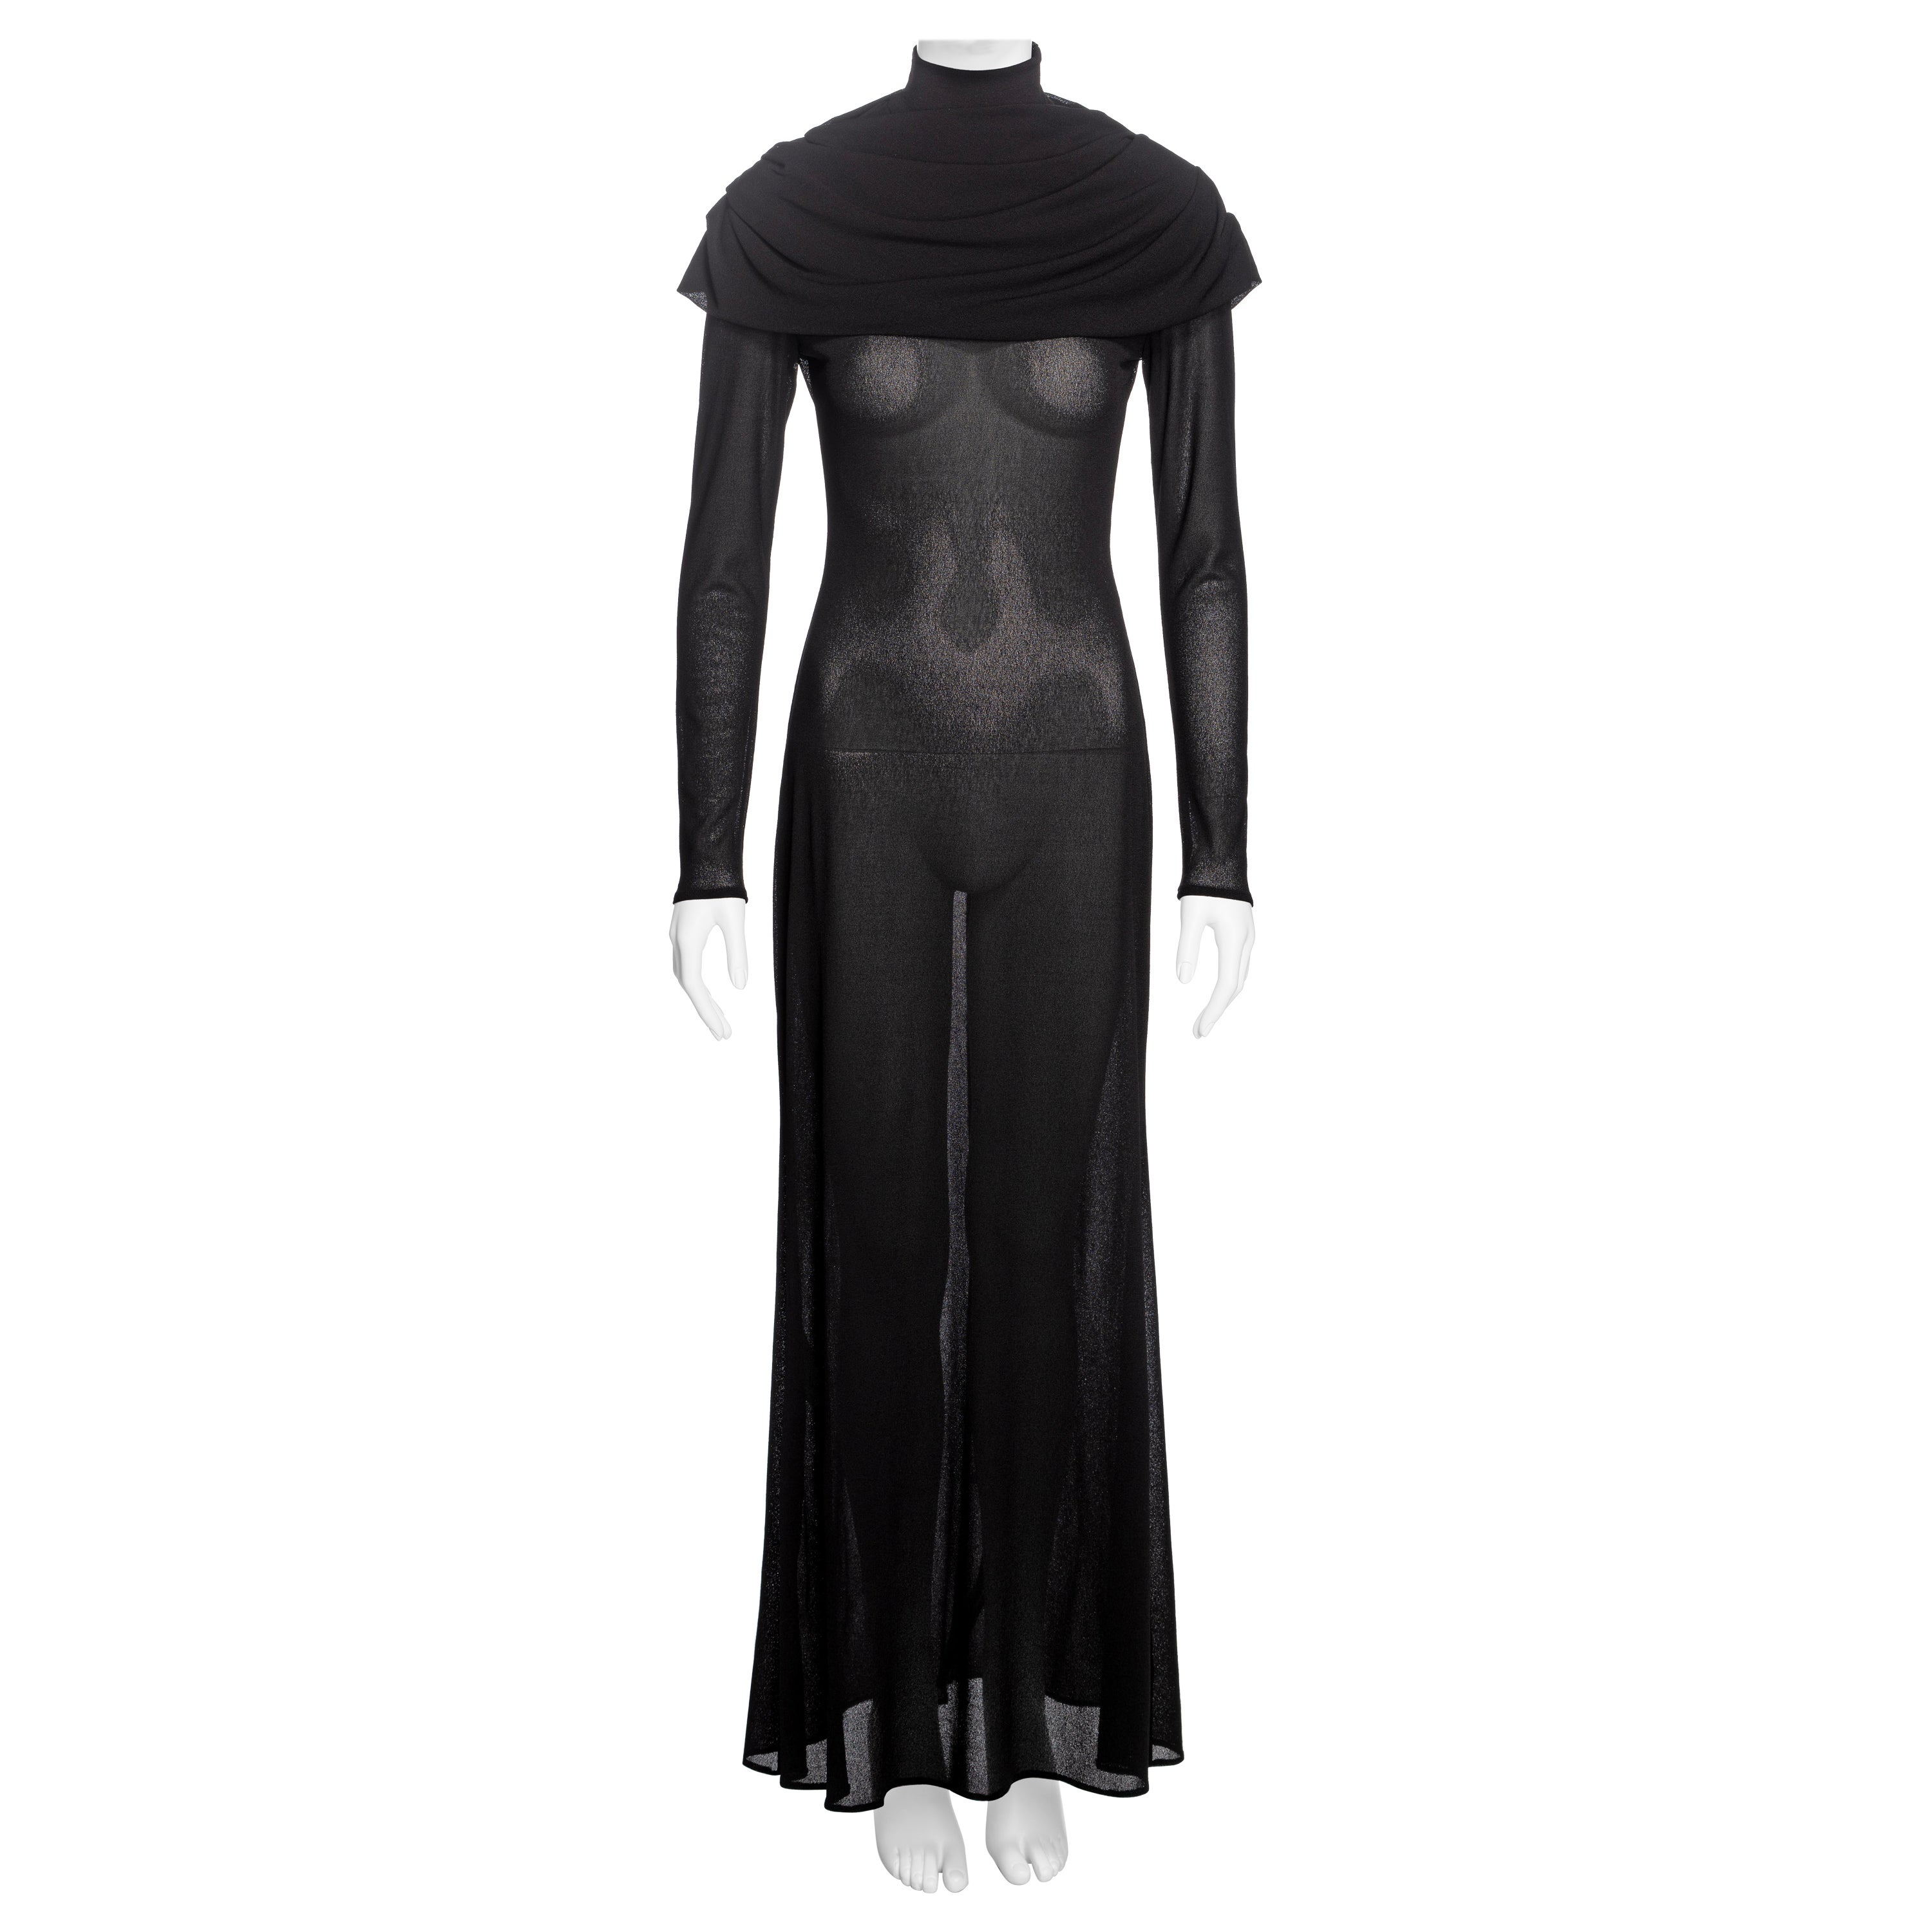 Alexander McQueen Black Mock Neck Evening Dress with Draped Cowl, 'Joan' FW 1998 For Sale